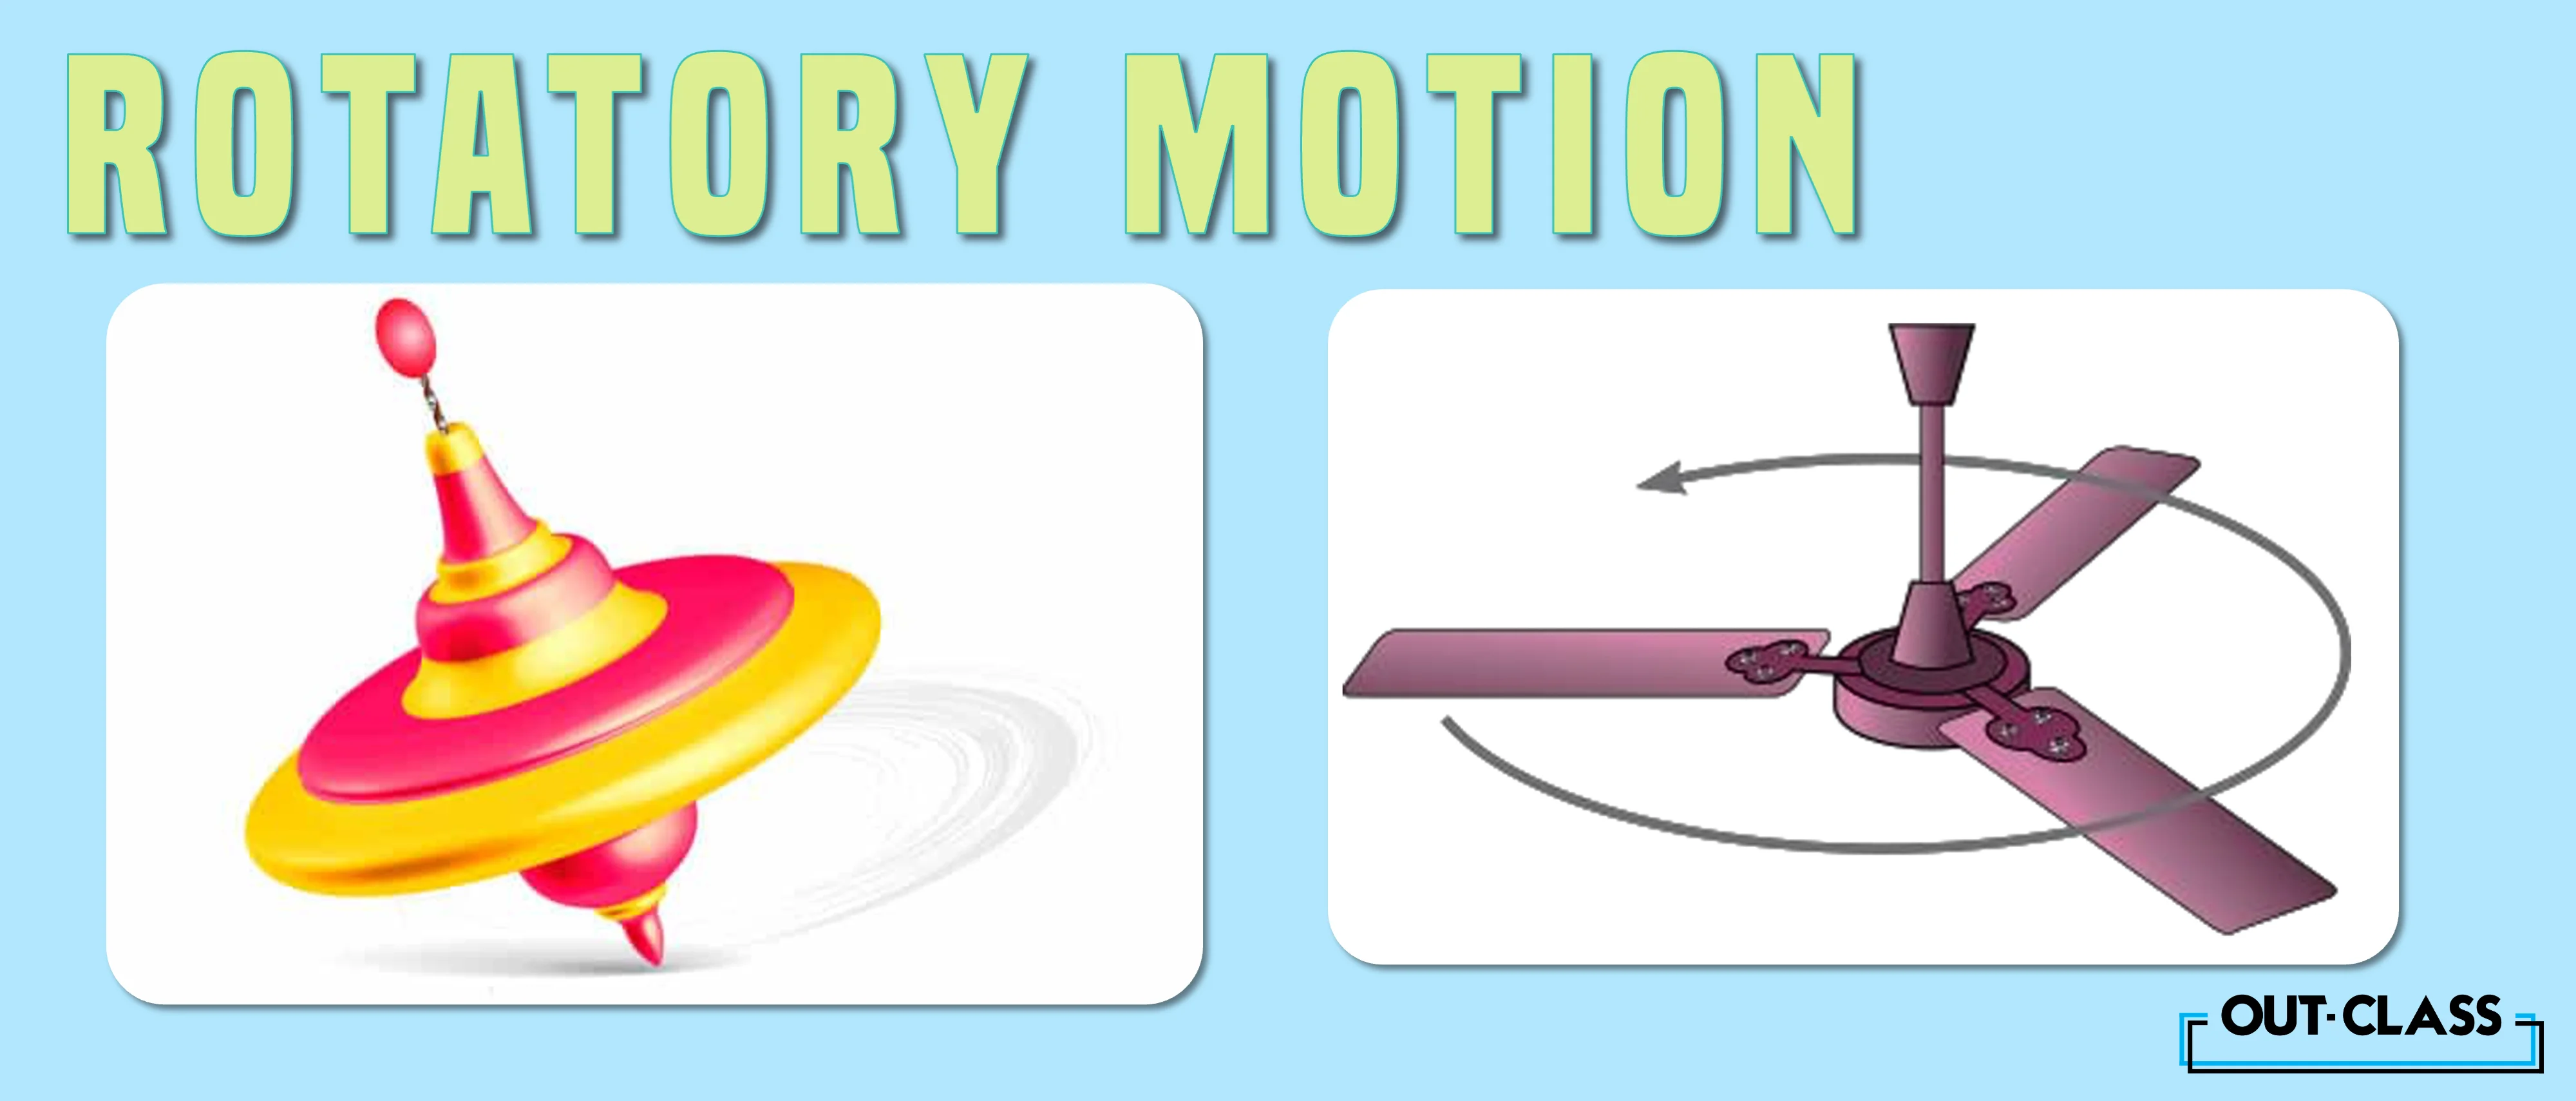 What is Rotatory Motion?  Simply put, rotatory motion is the motion of a body that spins or rotates about an axis. The axis of rotation can be inside or outside the body, and this axis can be fixed or constantly changing. For example, a spinning top has a rotatory motion about an axis which passes through its centre and remains fixed. However, a helicopter has a rotatory motion about an axis that passes through its rotor blades and is changing. It shows the 5 examples of rotatory motion.